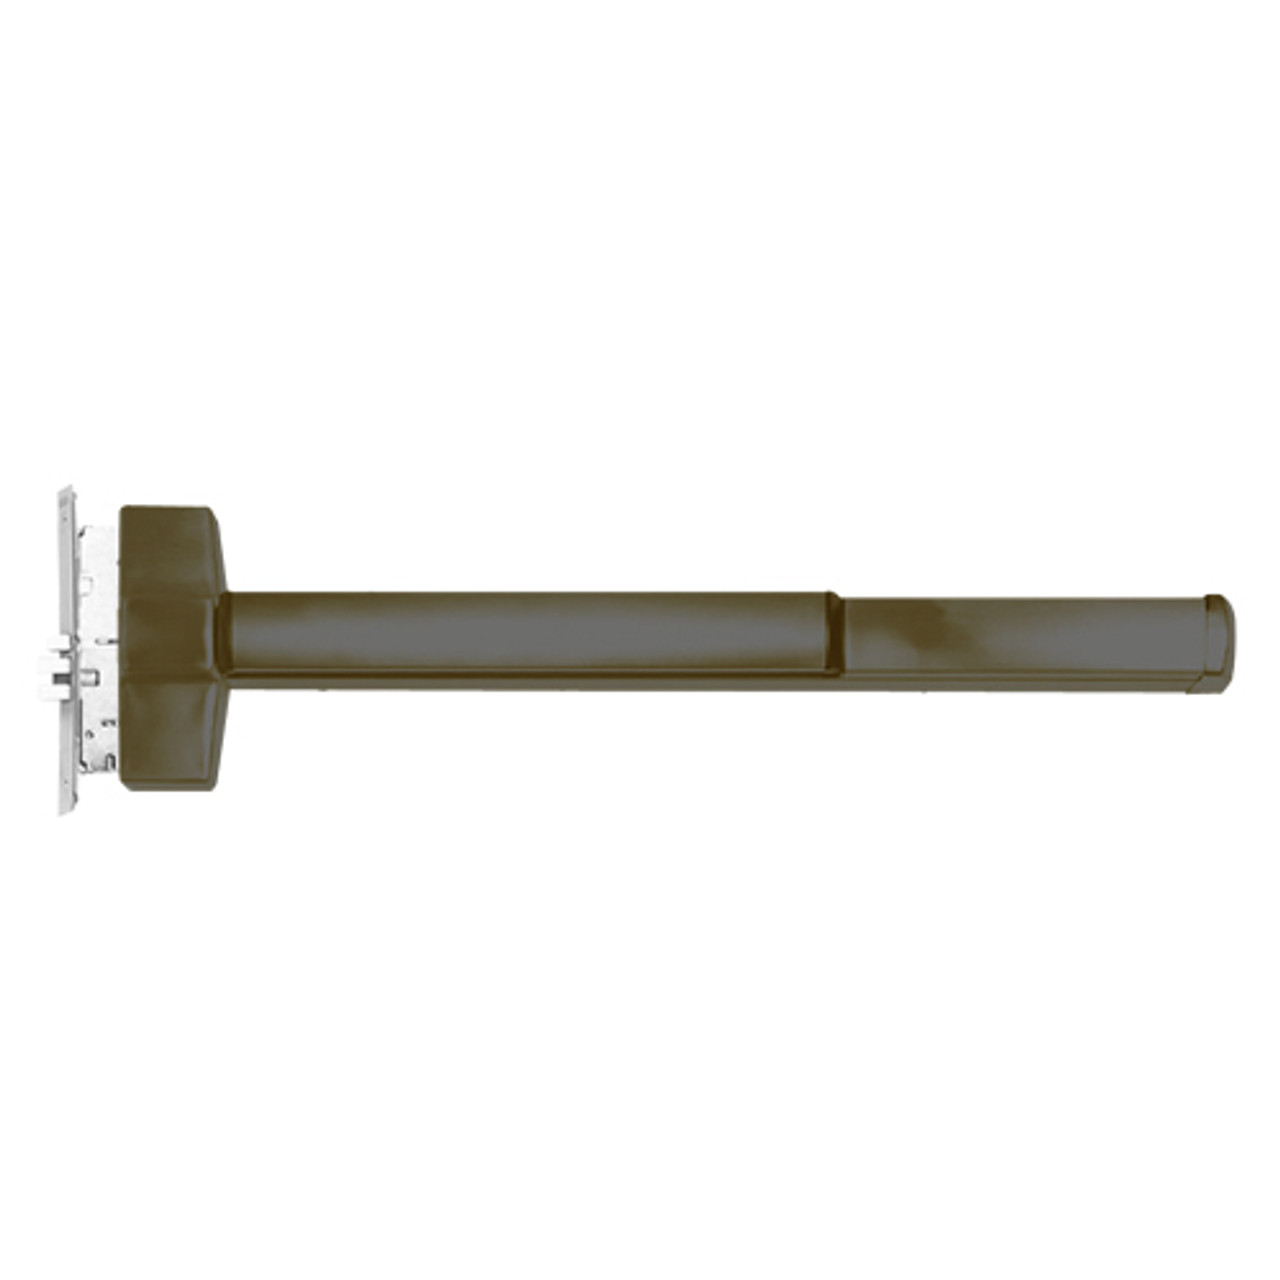 ED5657AL-613-W048-MELR-M92-LHR Corbin ED5600 Series Fire Rated Mortise Exit Device with Motorized Latch Retraction and Touchbar Monitoring in Oil Rubbed Bronze Finish